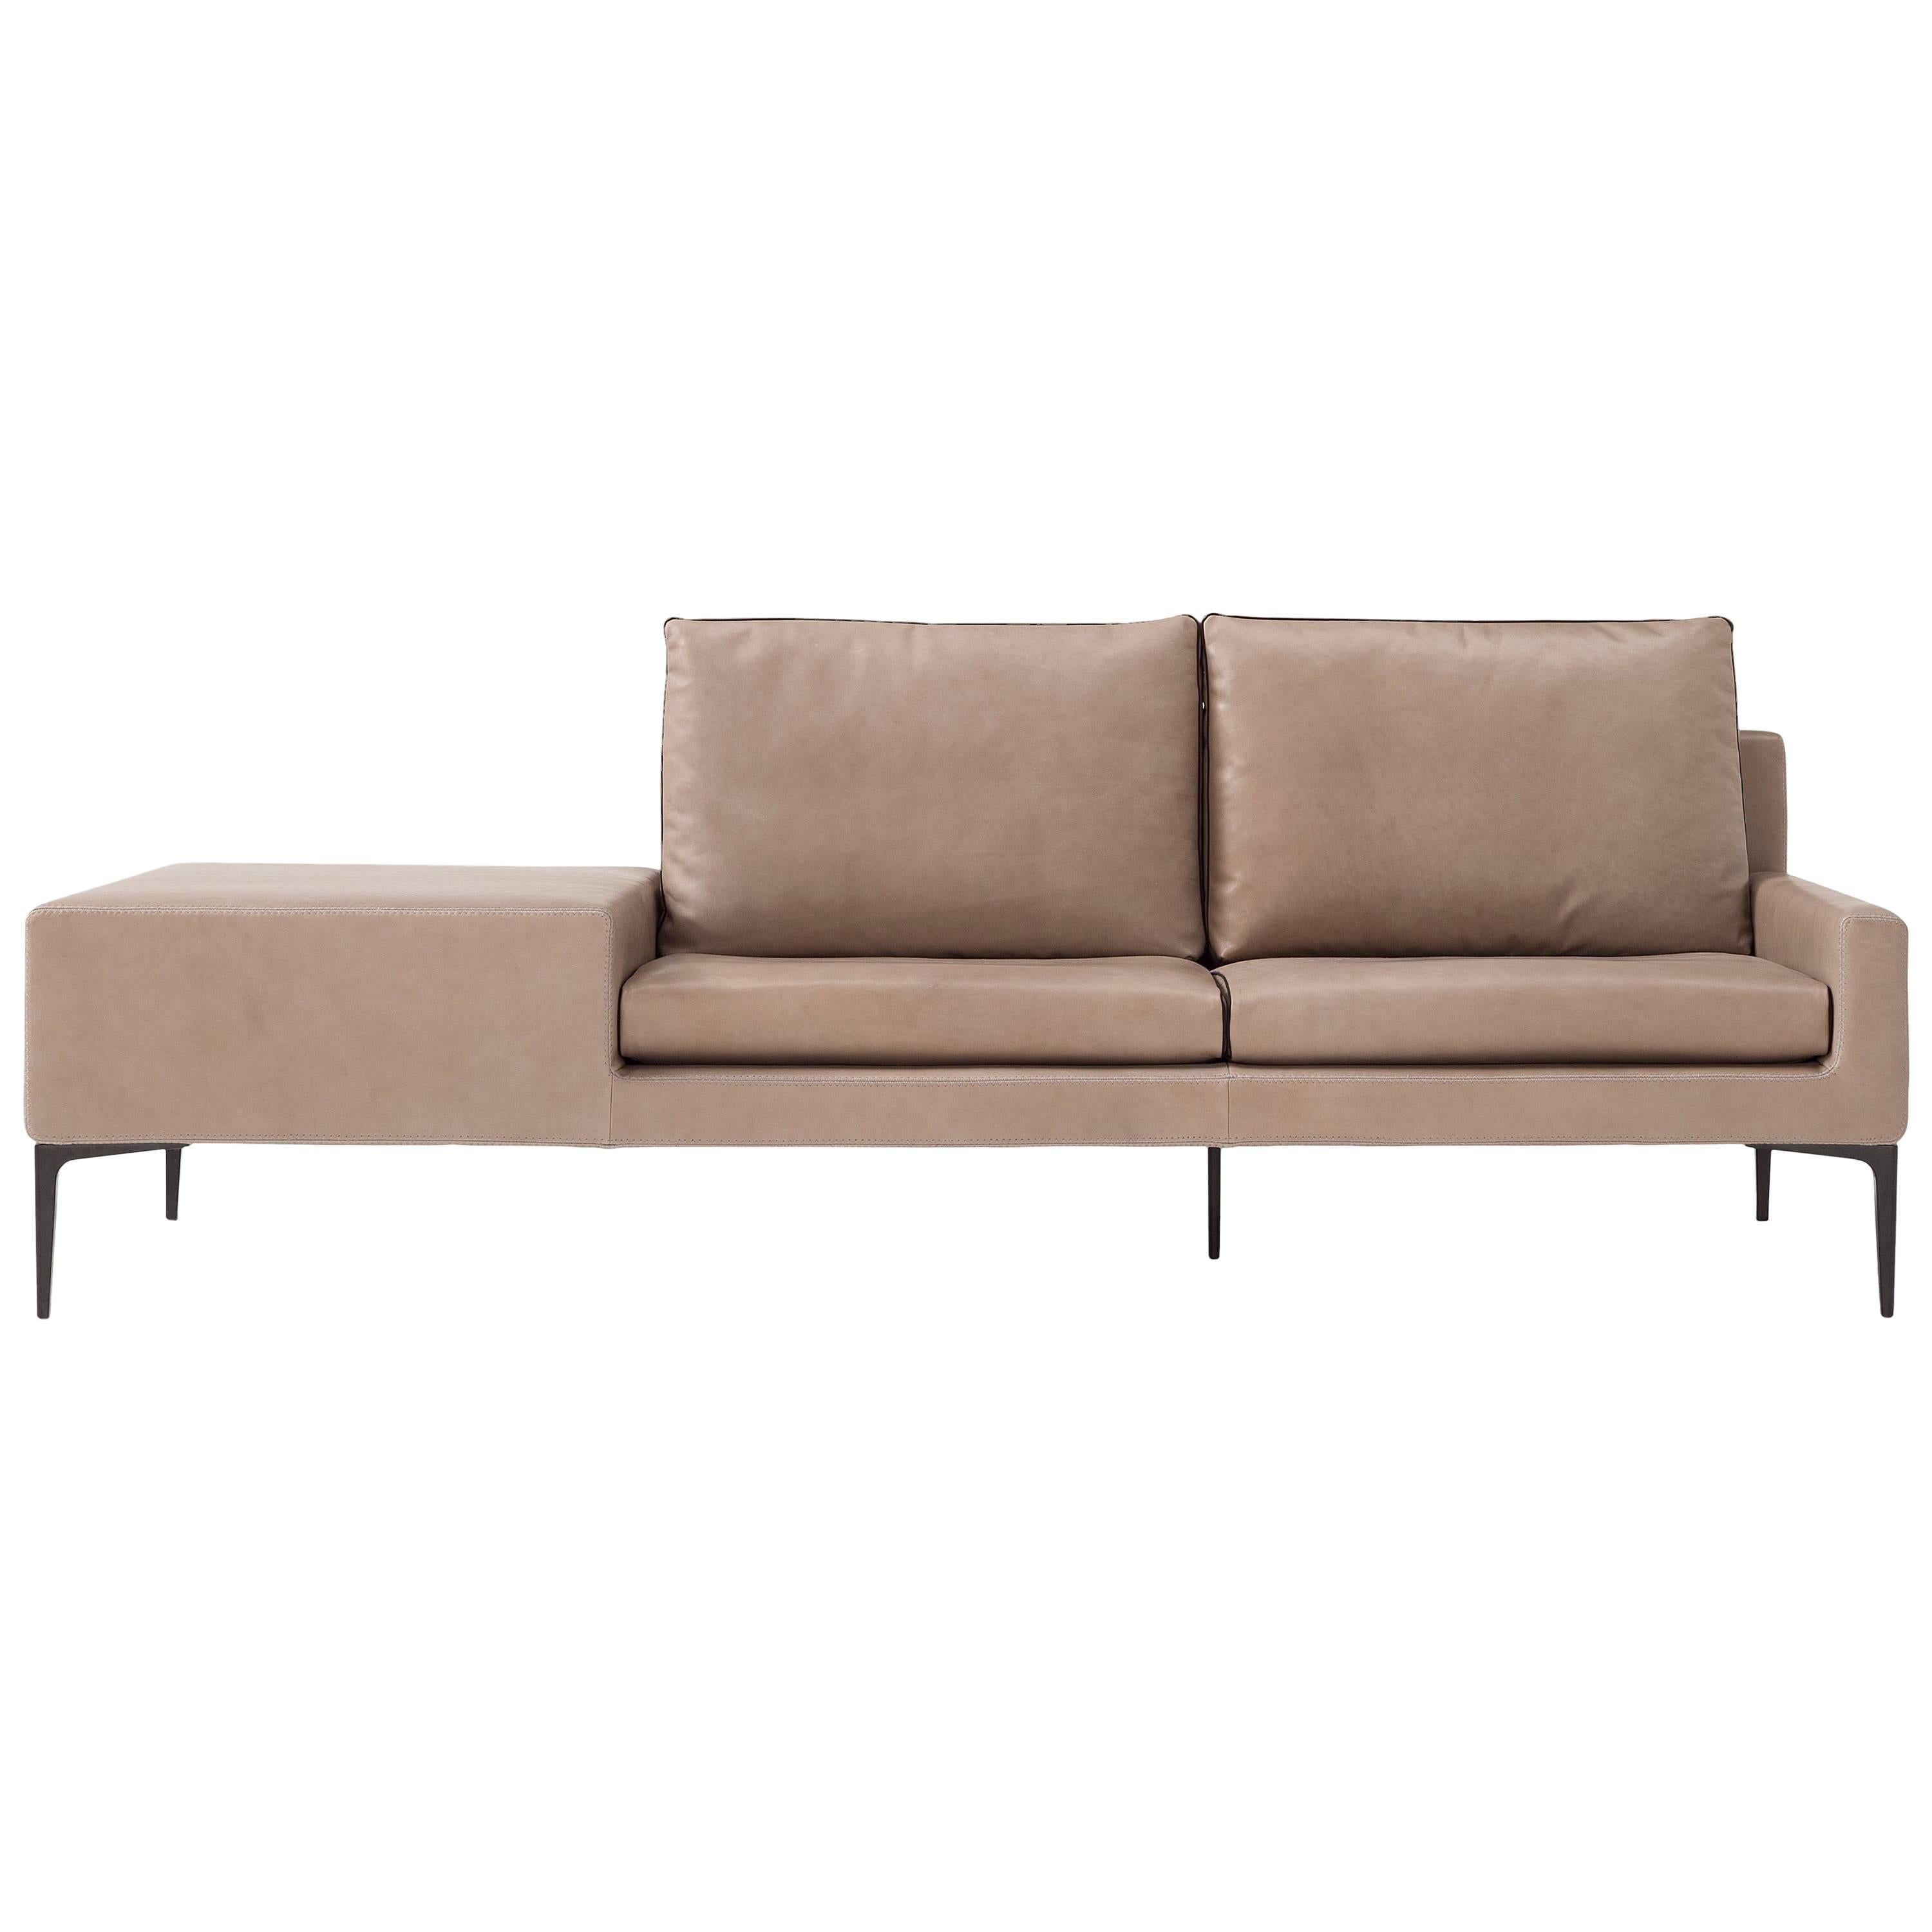 Elsa Sofa in by Luca Scacchetti with Connected Table For Sale